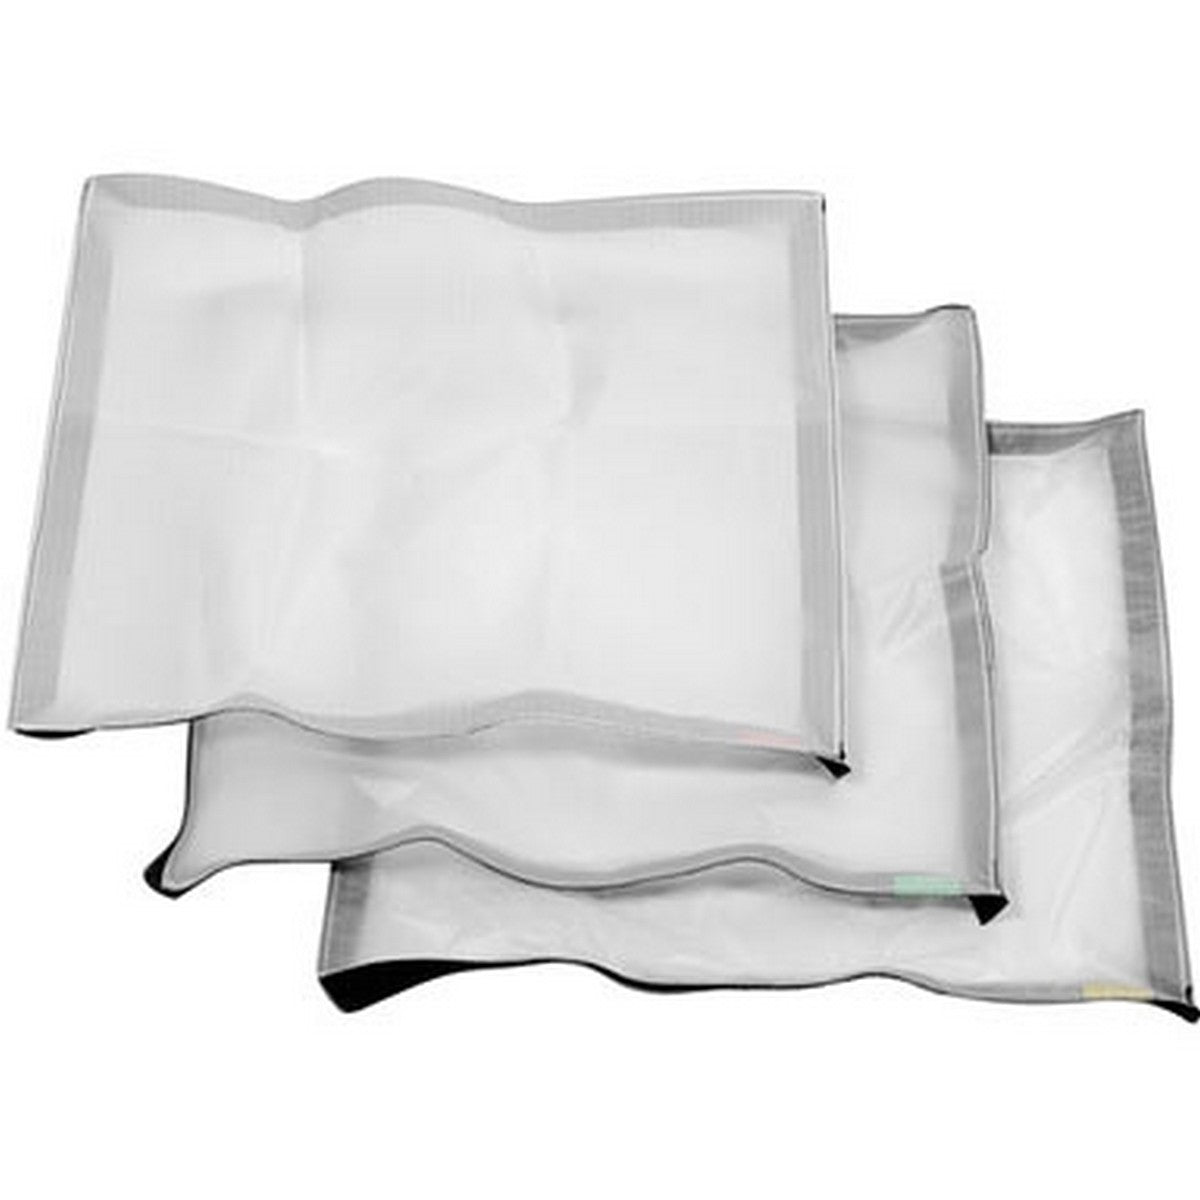 Litepanels Cloth Set | Cloth for Softbox for Astra 1x1 and Hilio D12/T12 900-0027